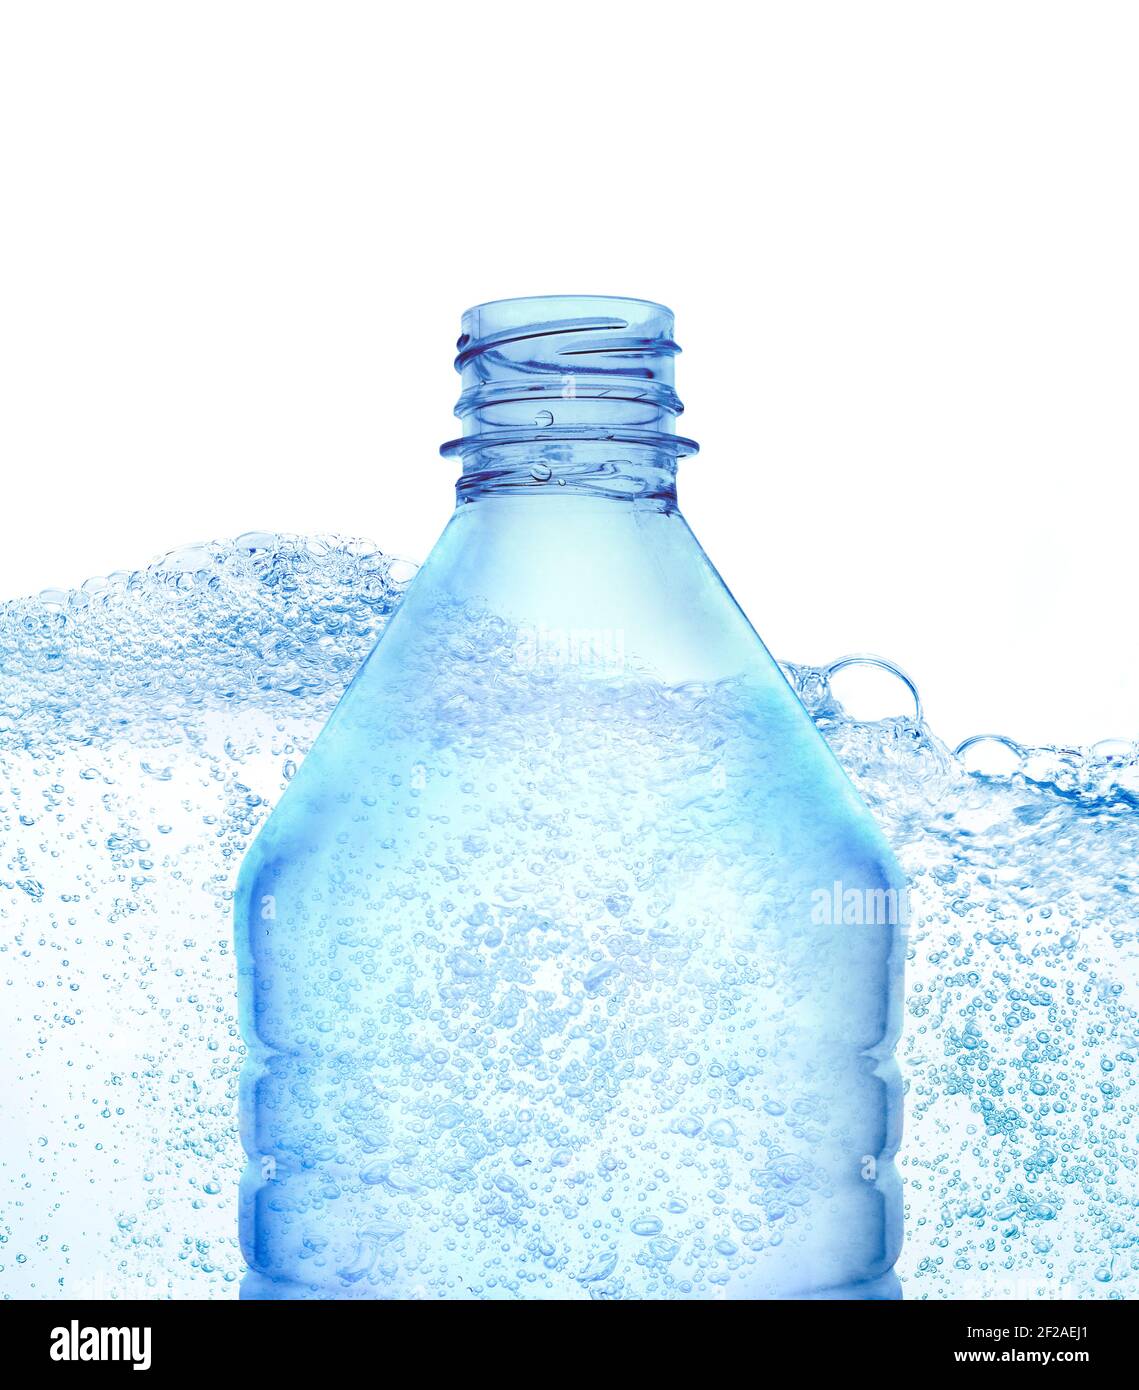 Transparent plastic blue color bottle  against turbulence water background. Stock Photo